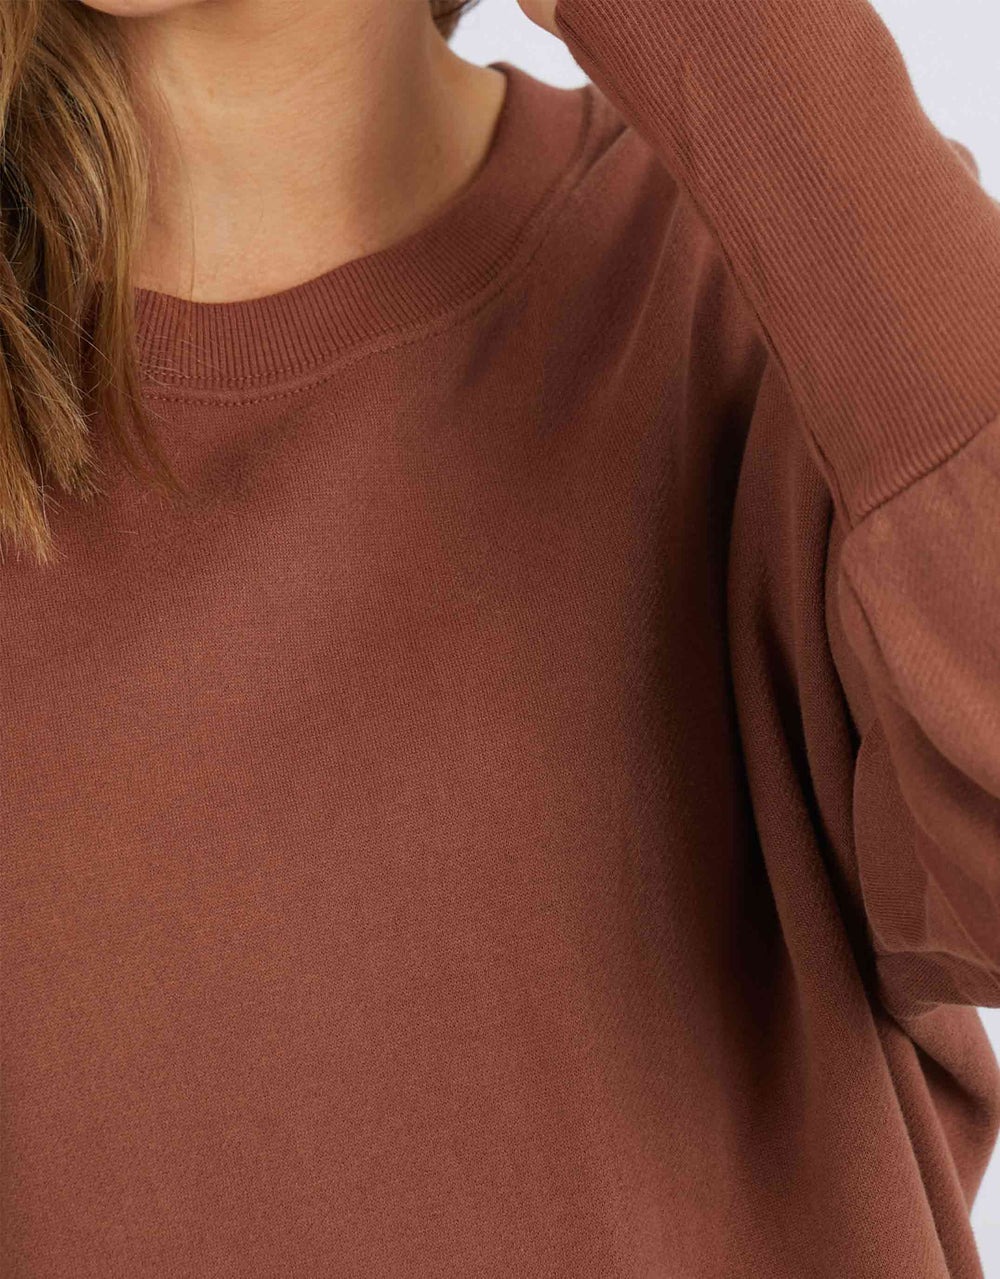 elm-clothing-divine-cosy-crew-chocolate-womens-clothing